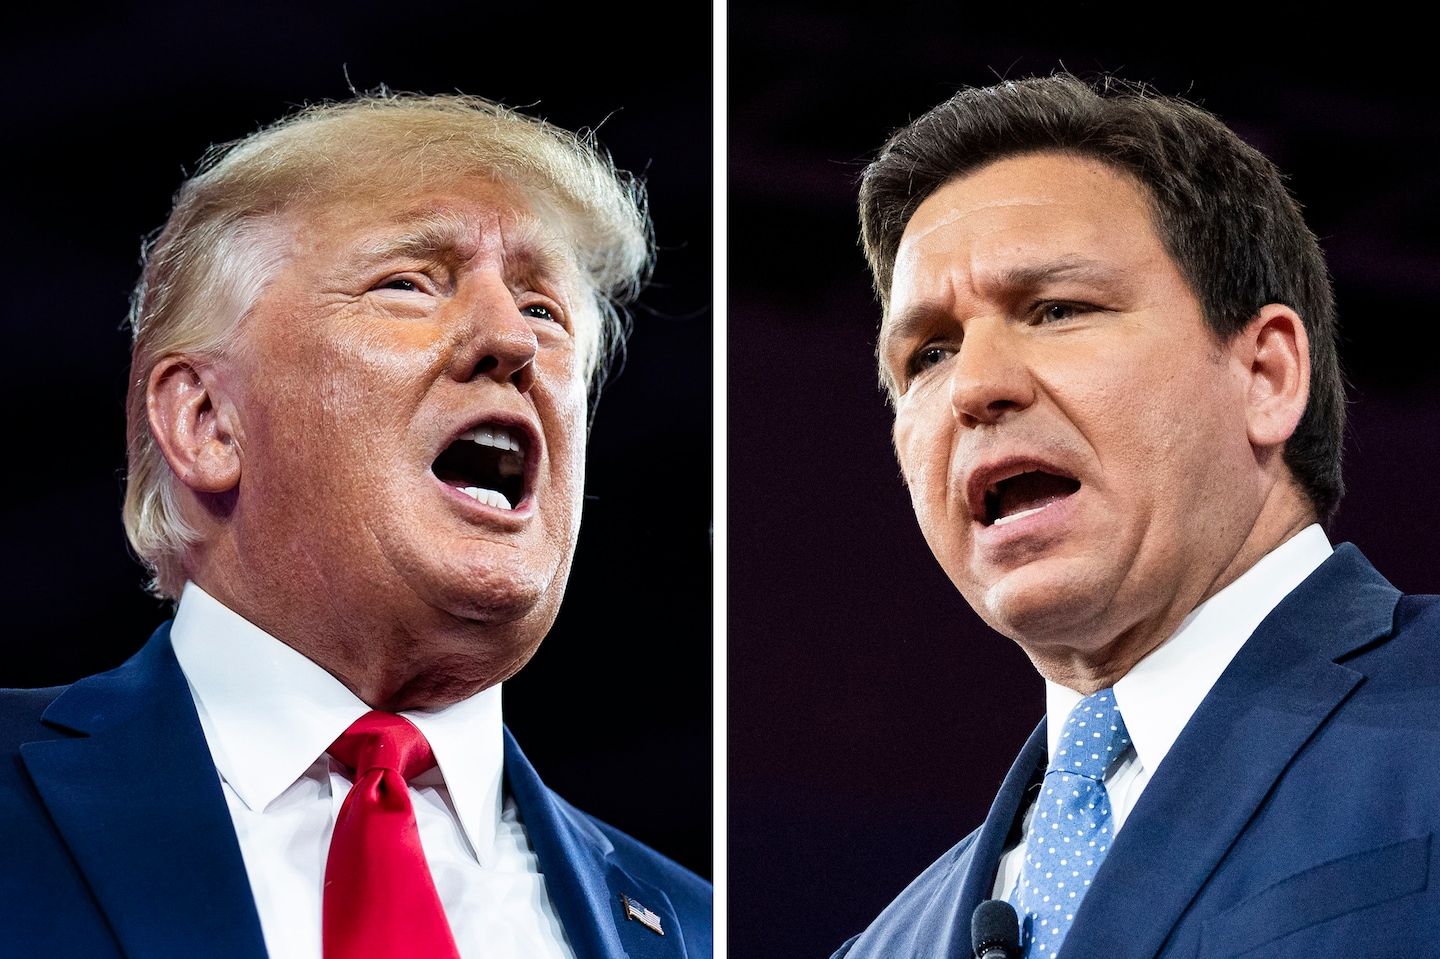 Trump attacks DeSantis from the Left, calls Florida's six week abortion ban "too harsh"